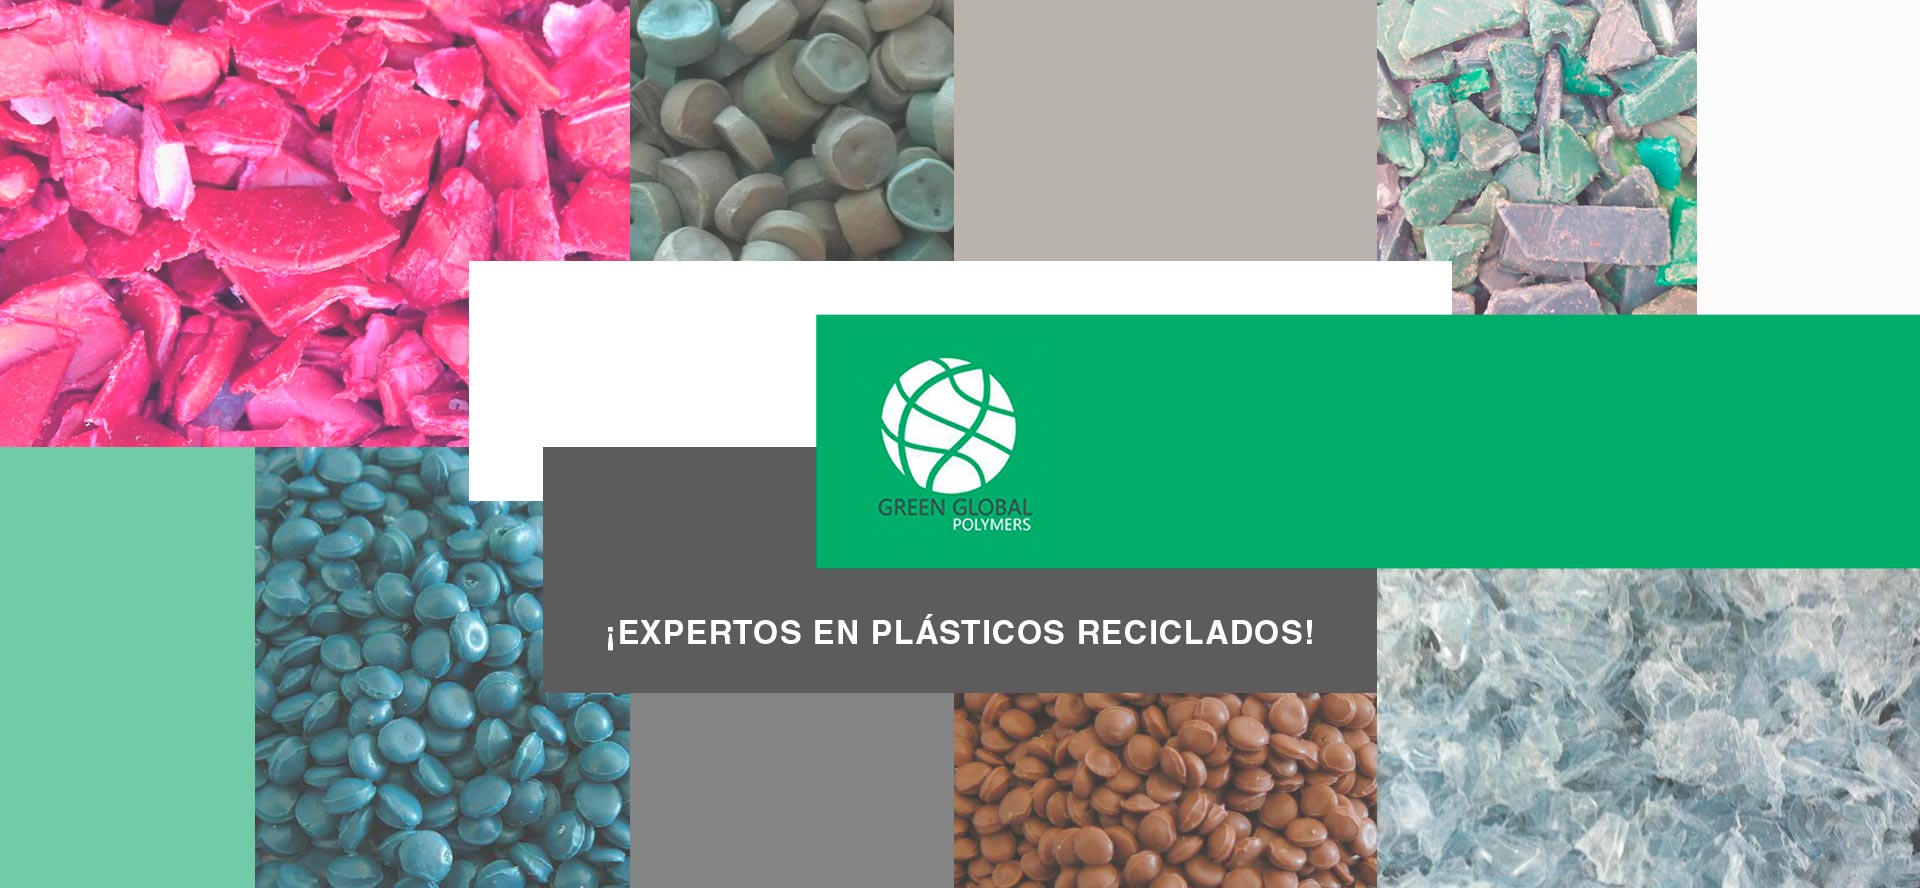 Green Global Polymers